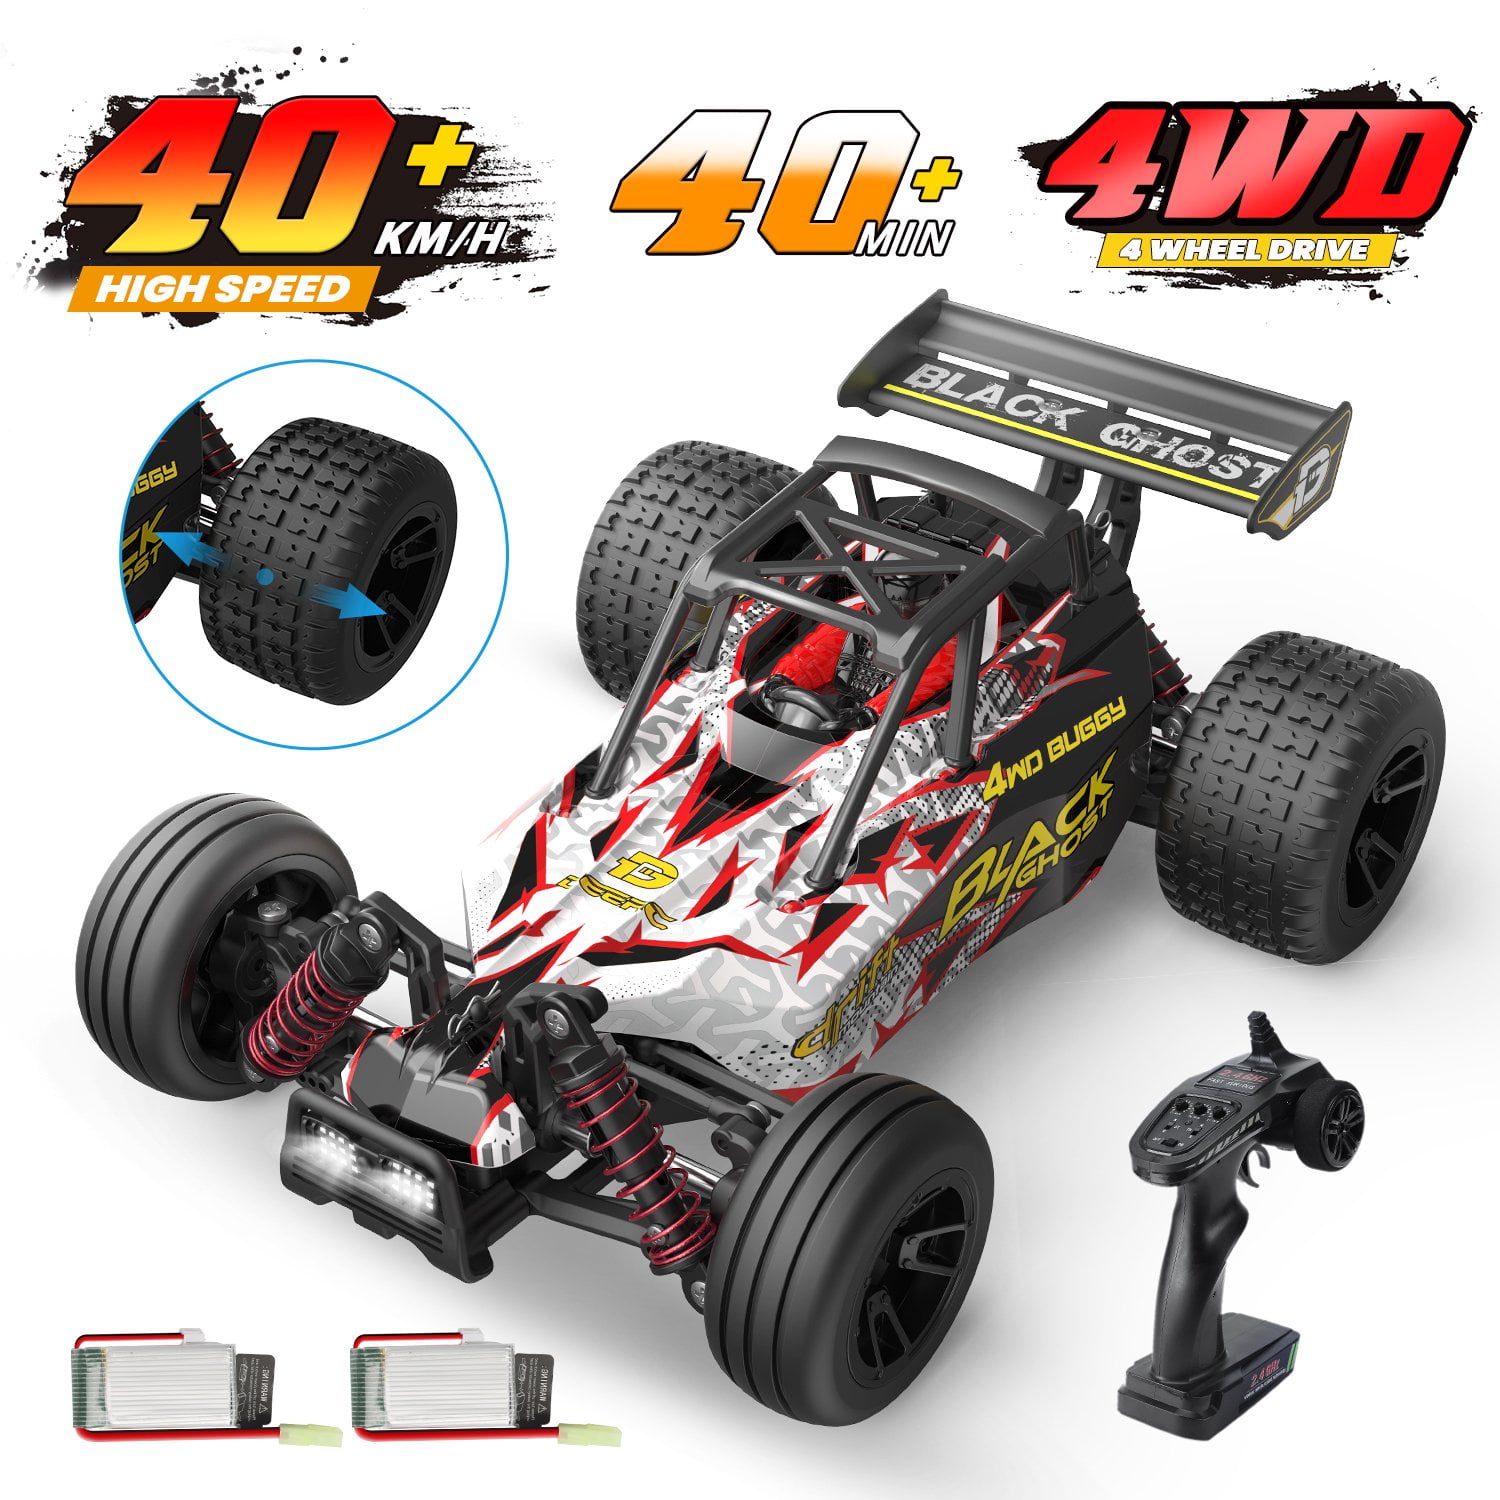 2 Batteries 2.4Ghz Remote Control RC Racing Cars High Speed for Kids Toys Gift 